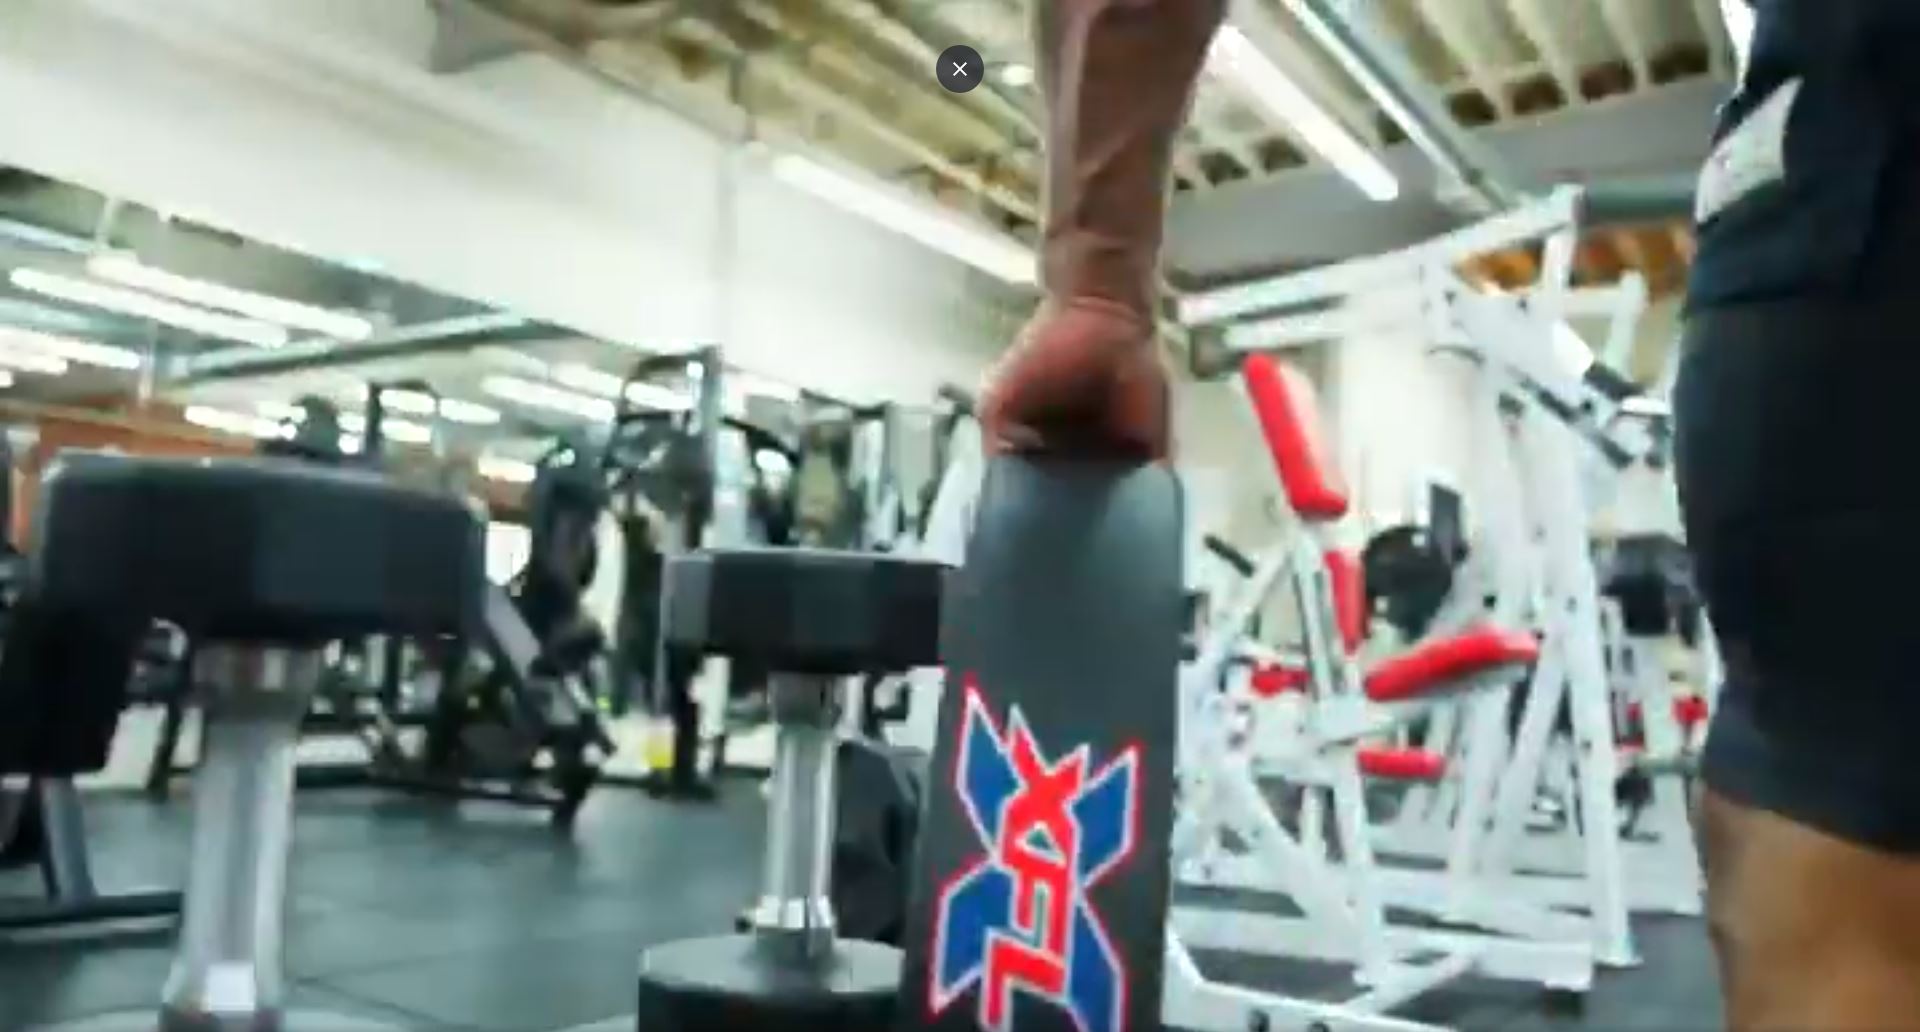 New Under Armor Ad From The Rock Shows XFL Weight Belt